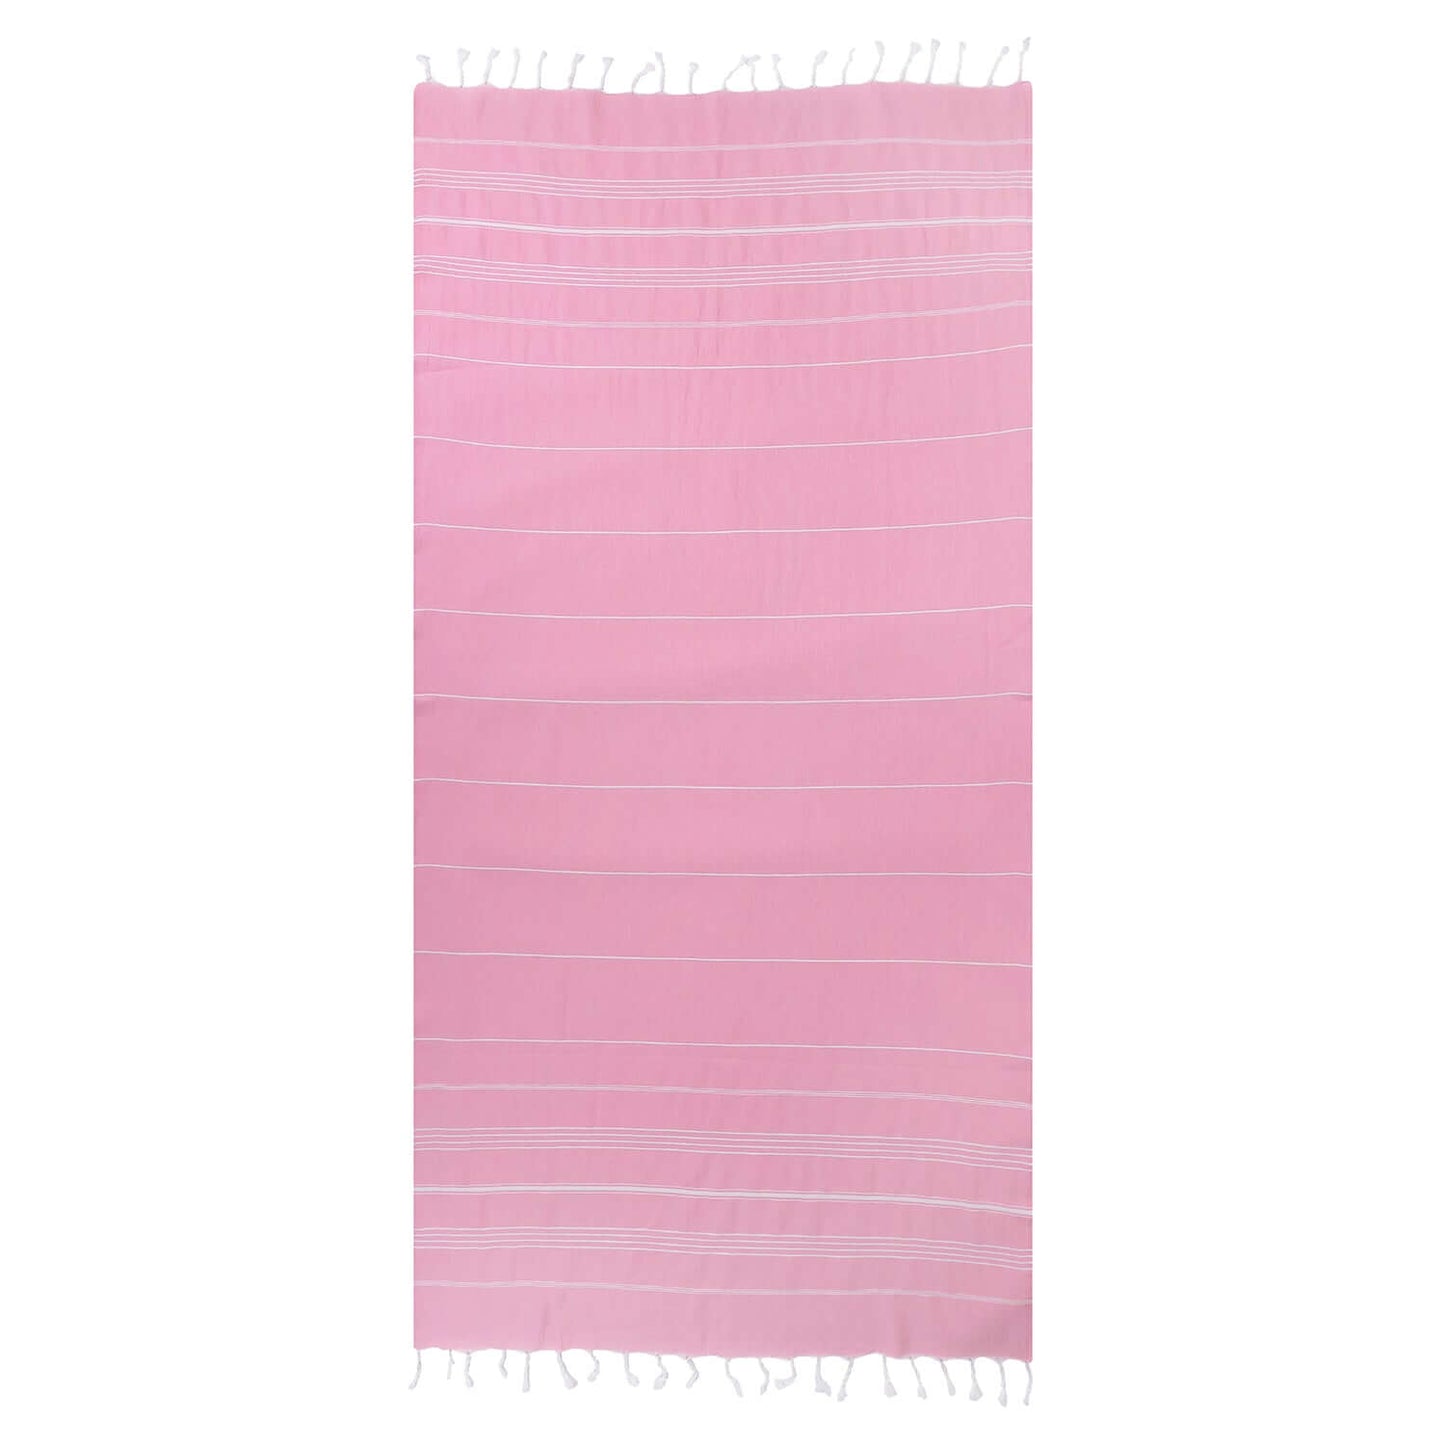  Loom Legacy pink beach towel with subtle horizontal stripes and white tassels along the top and bottom edges, displayed against a white background.